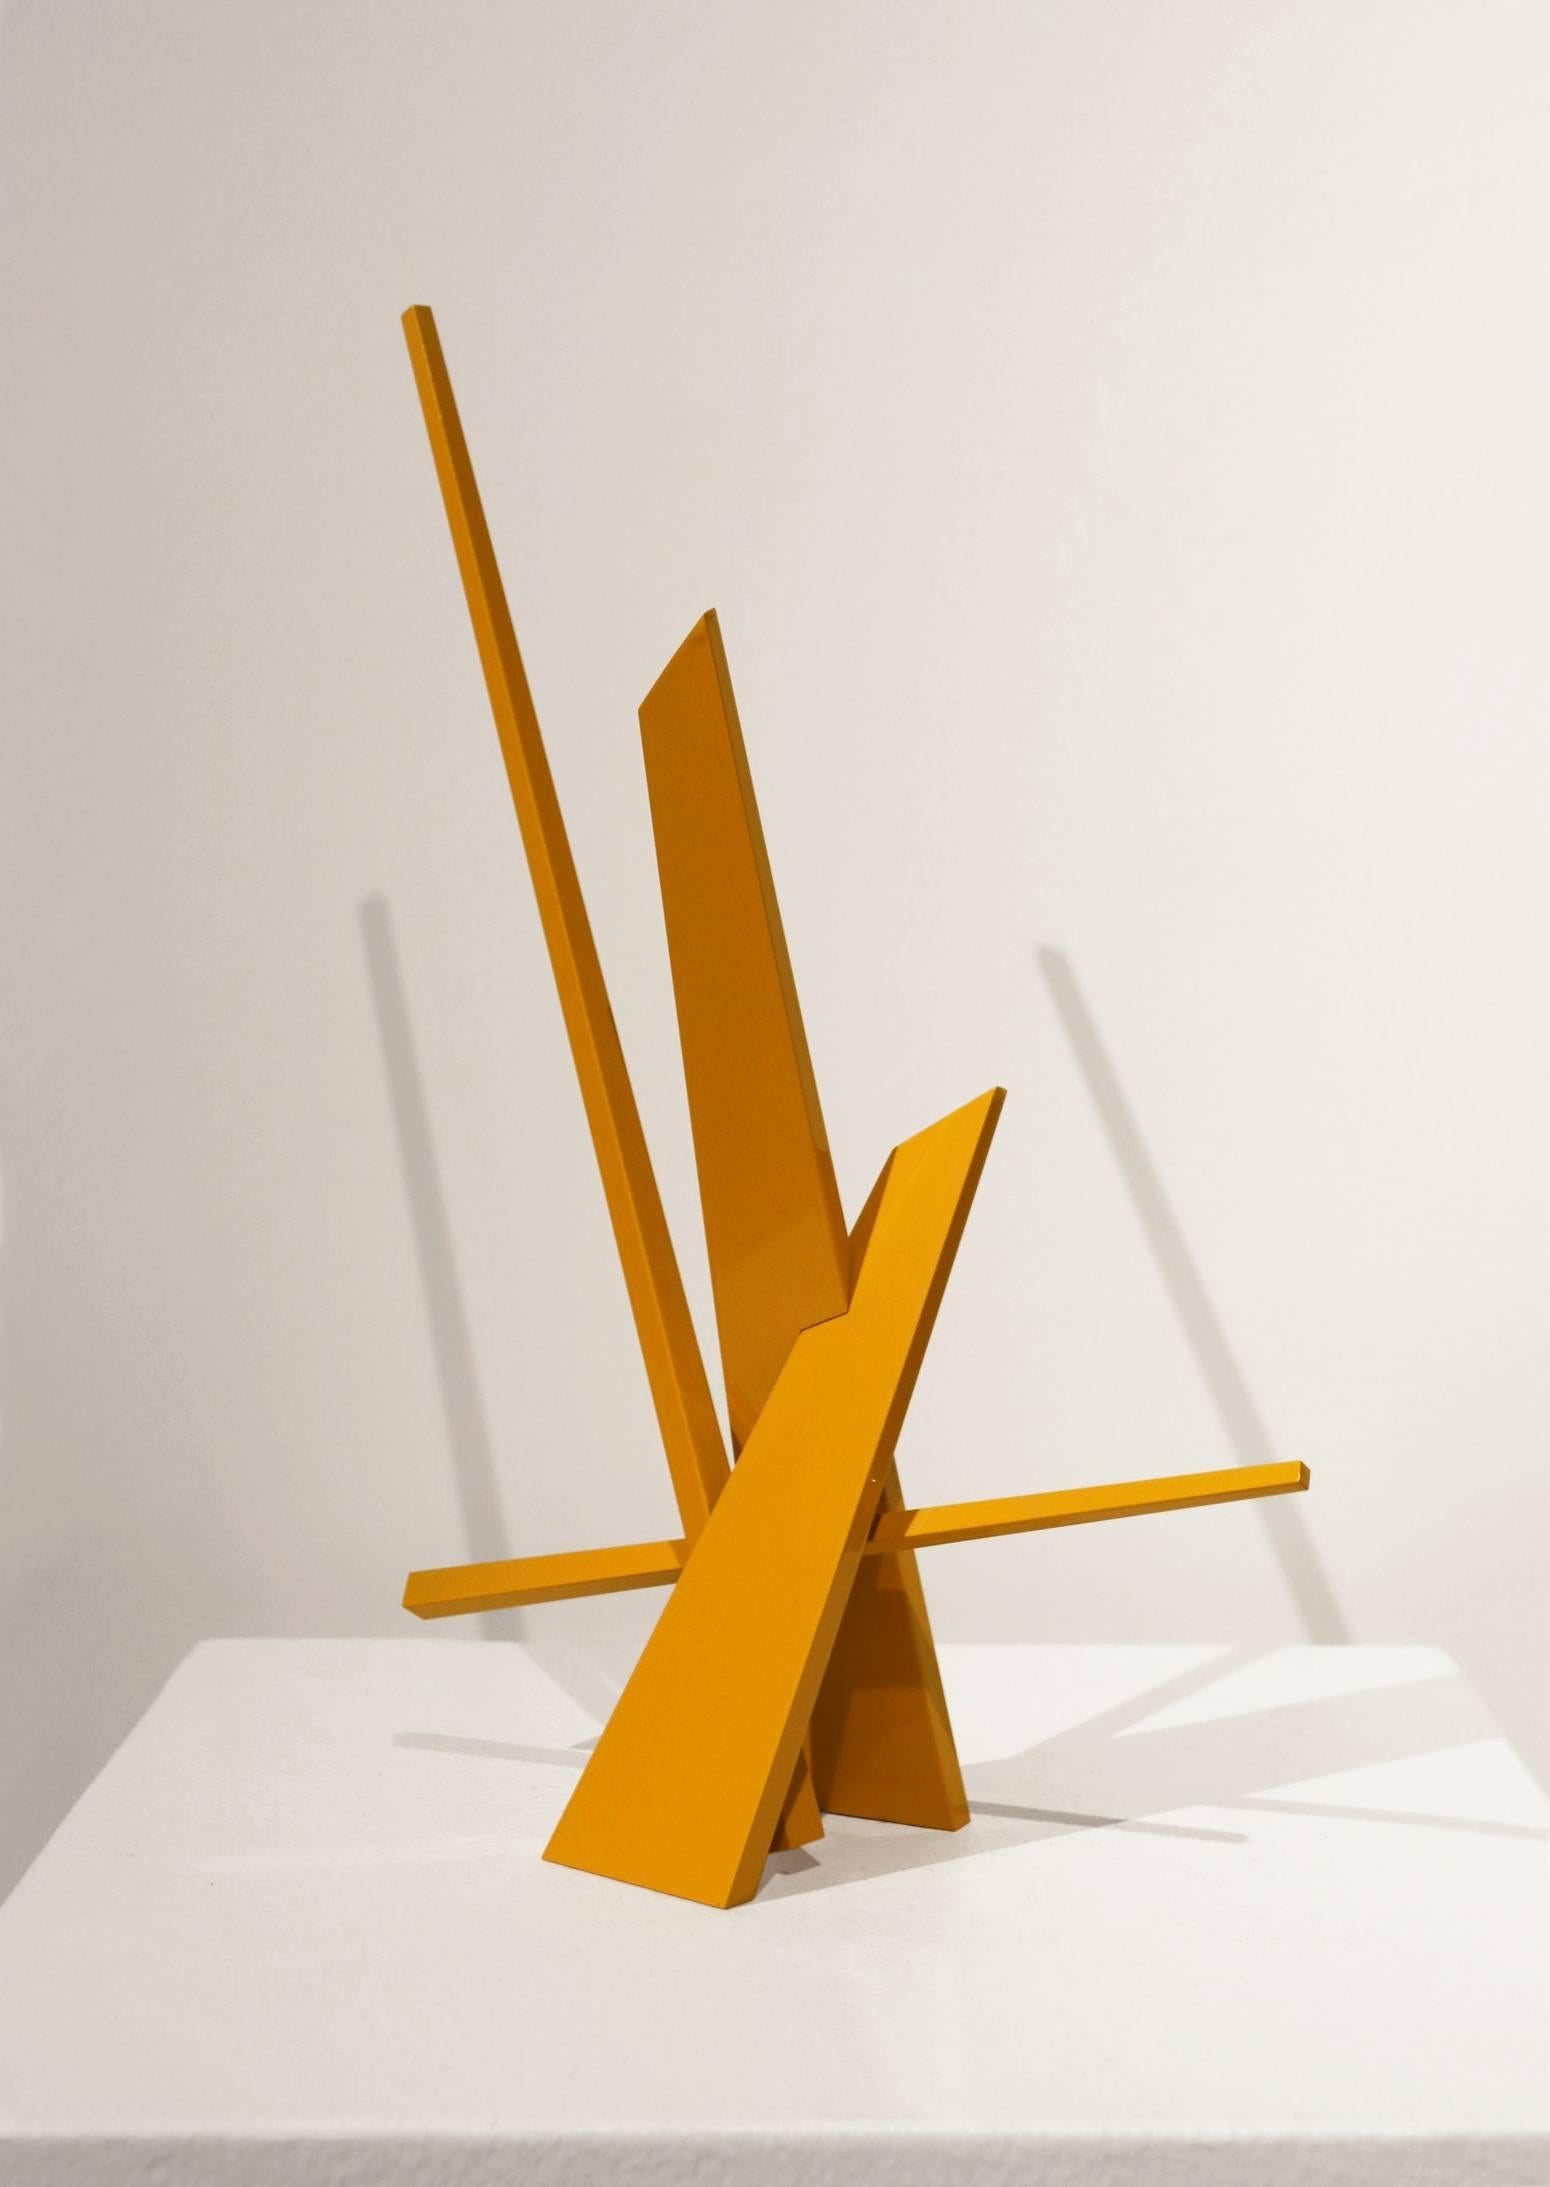 Star - Contemporary Sculpture by John Henry